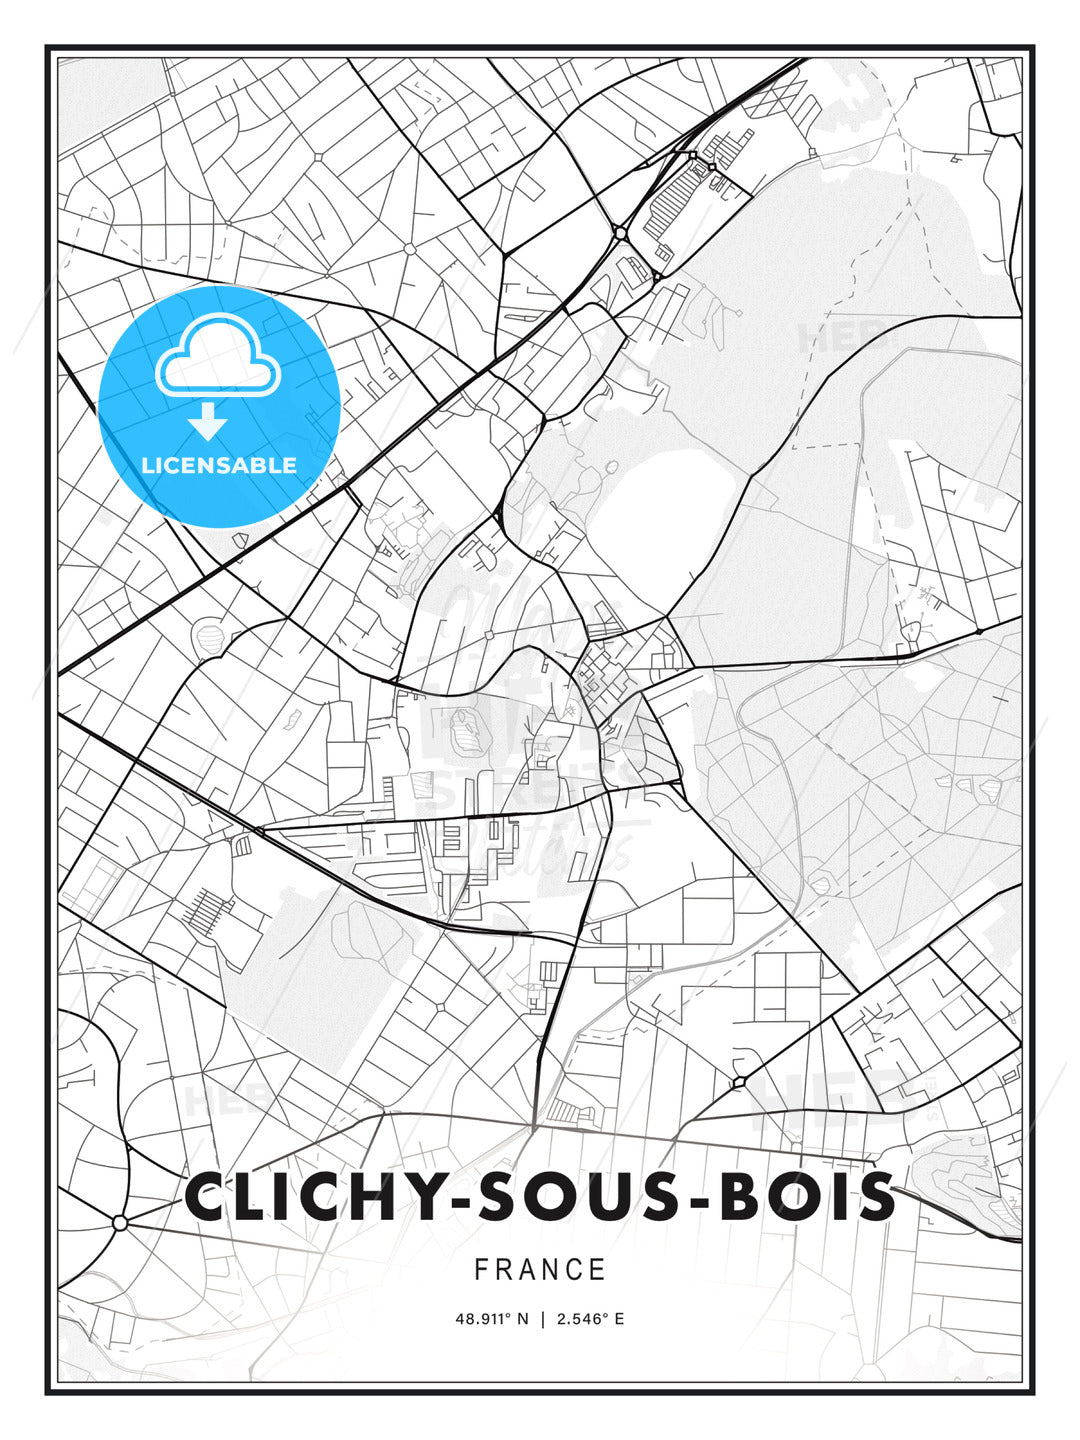 Clichy-sous-Bois, France, Modern Print Template in Various Formats - HEBSTREITS Sketches